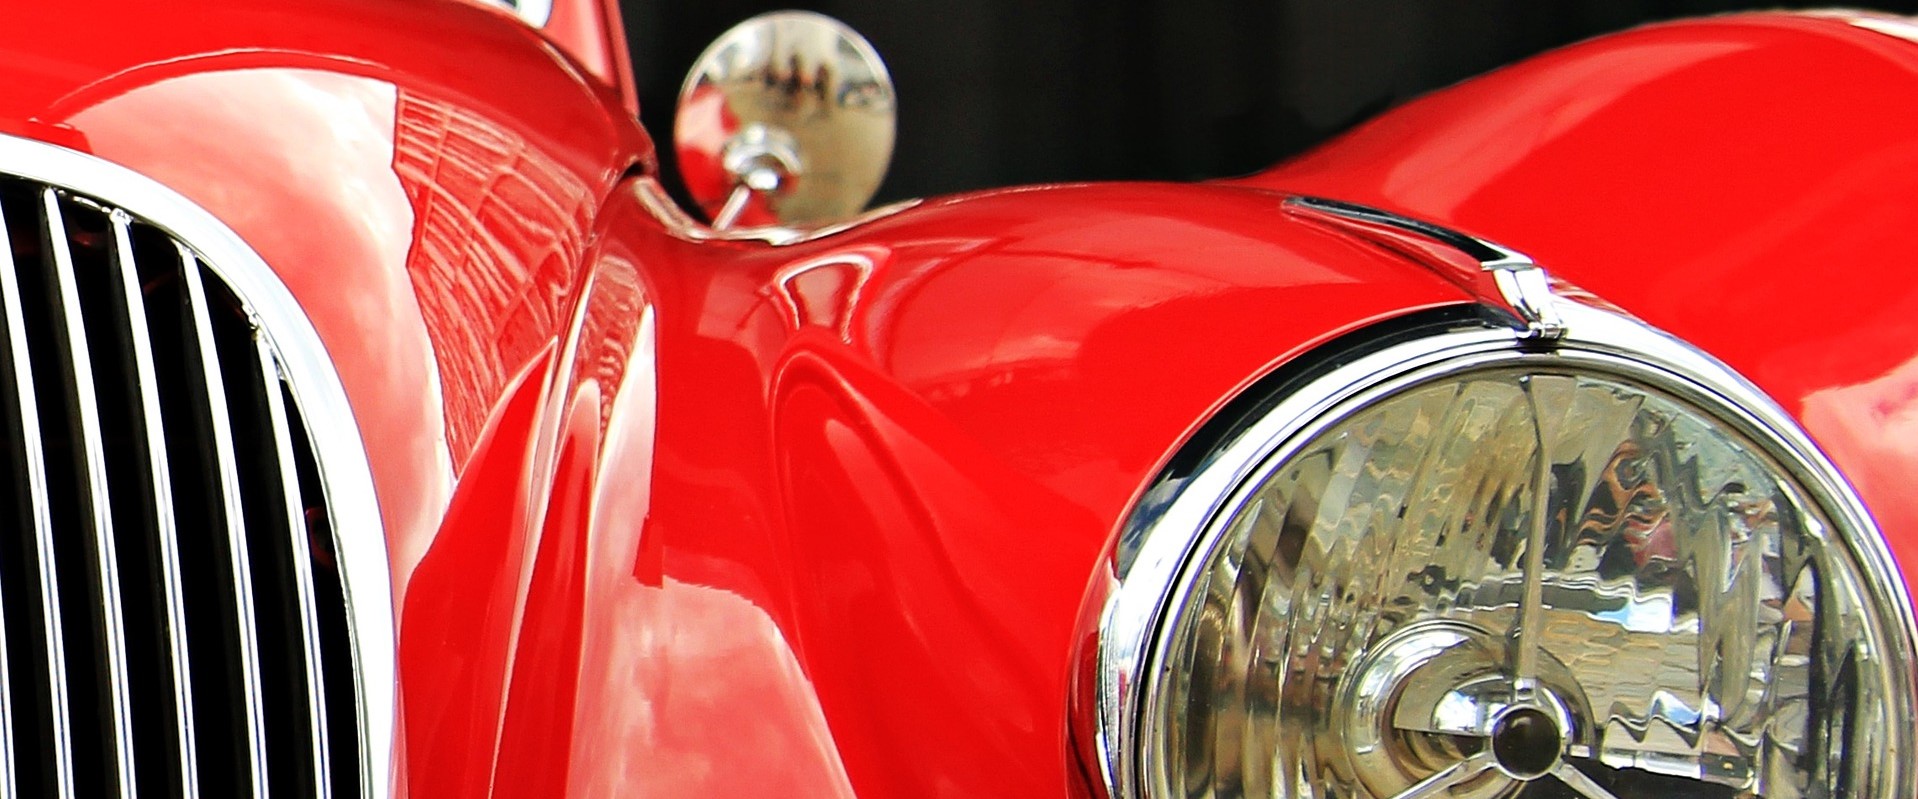 Red Vintage Car | Breast Cancer Car Donations